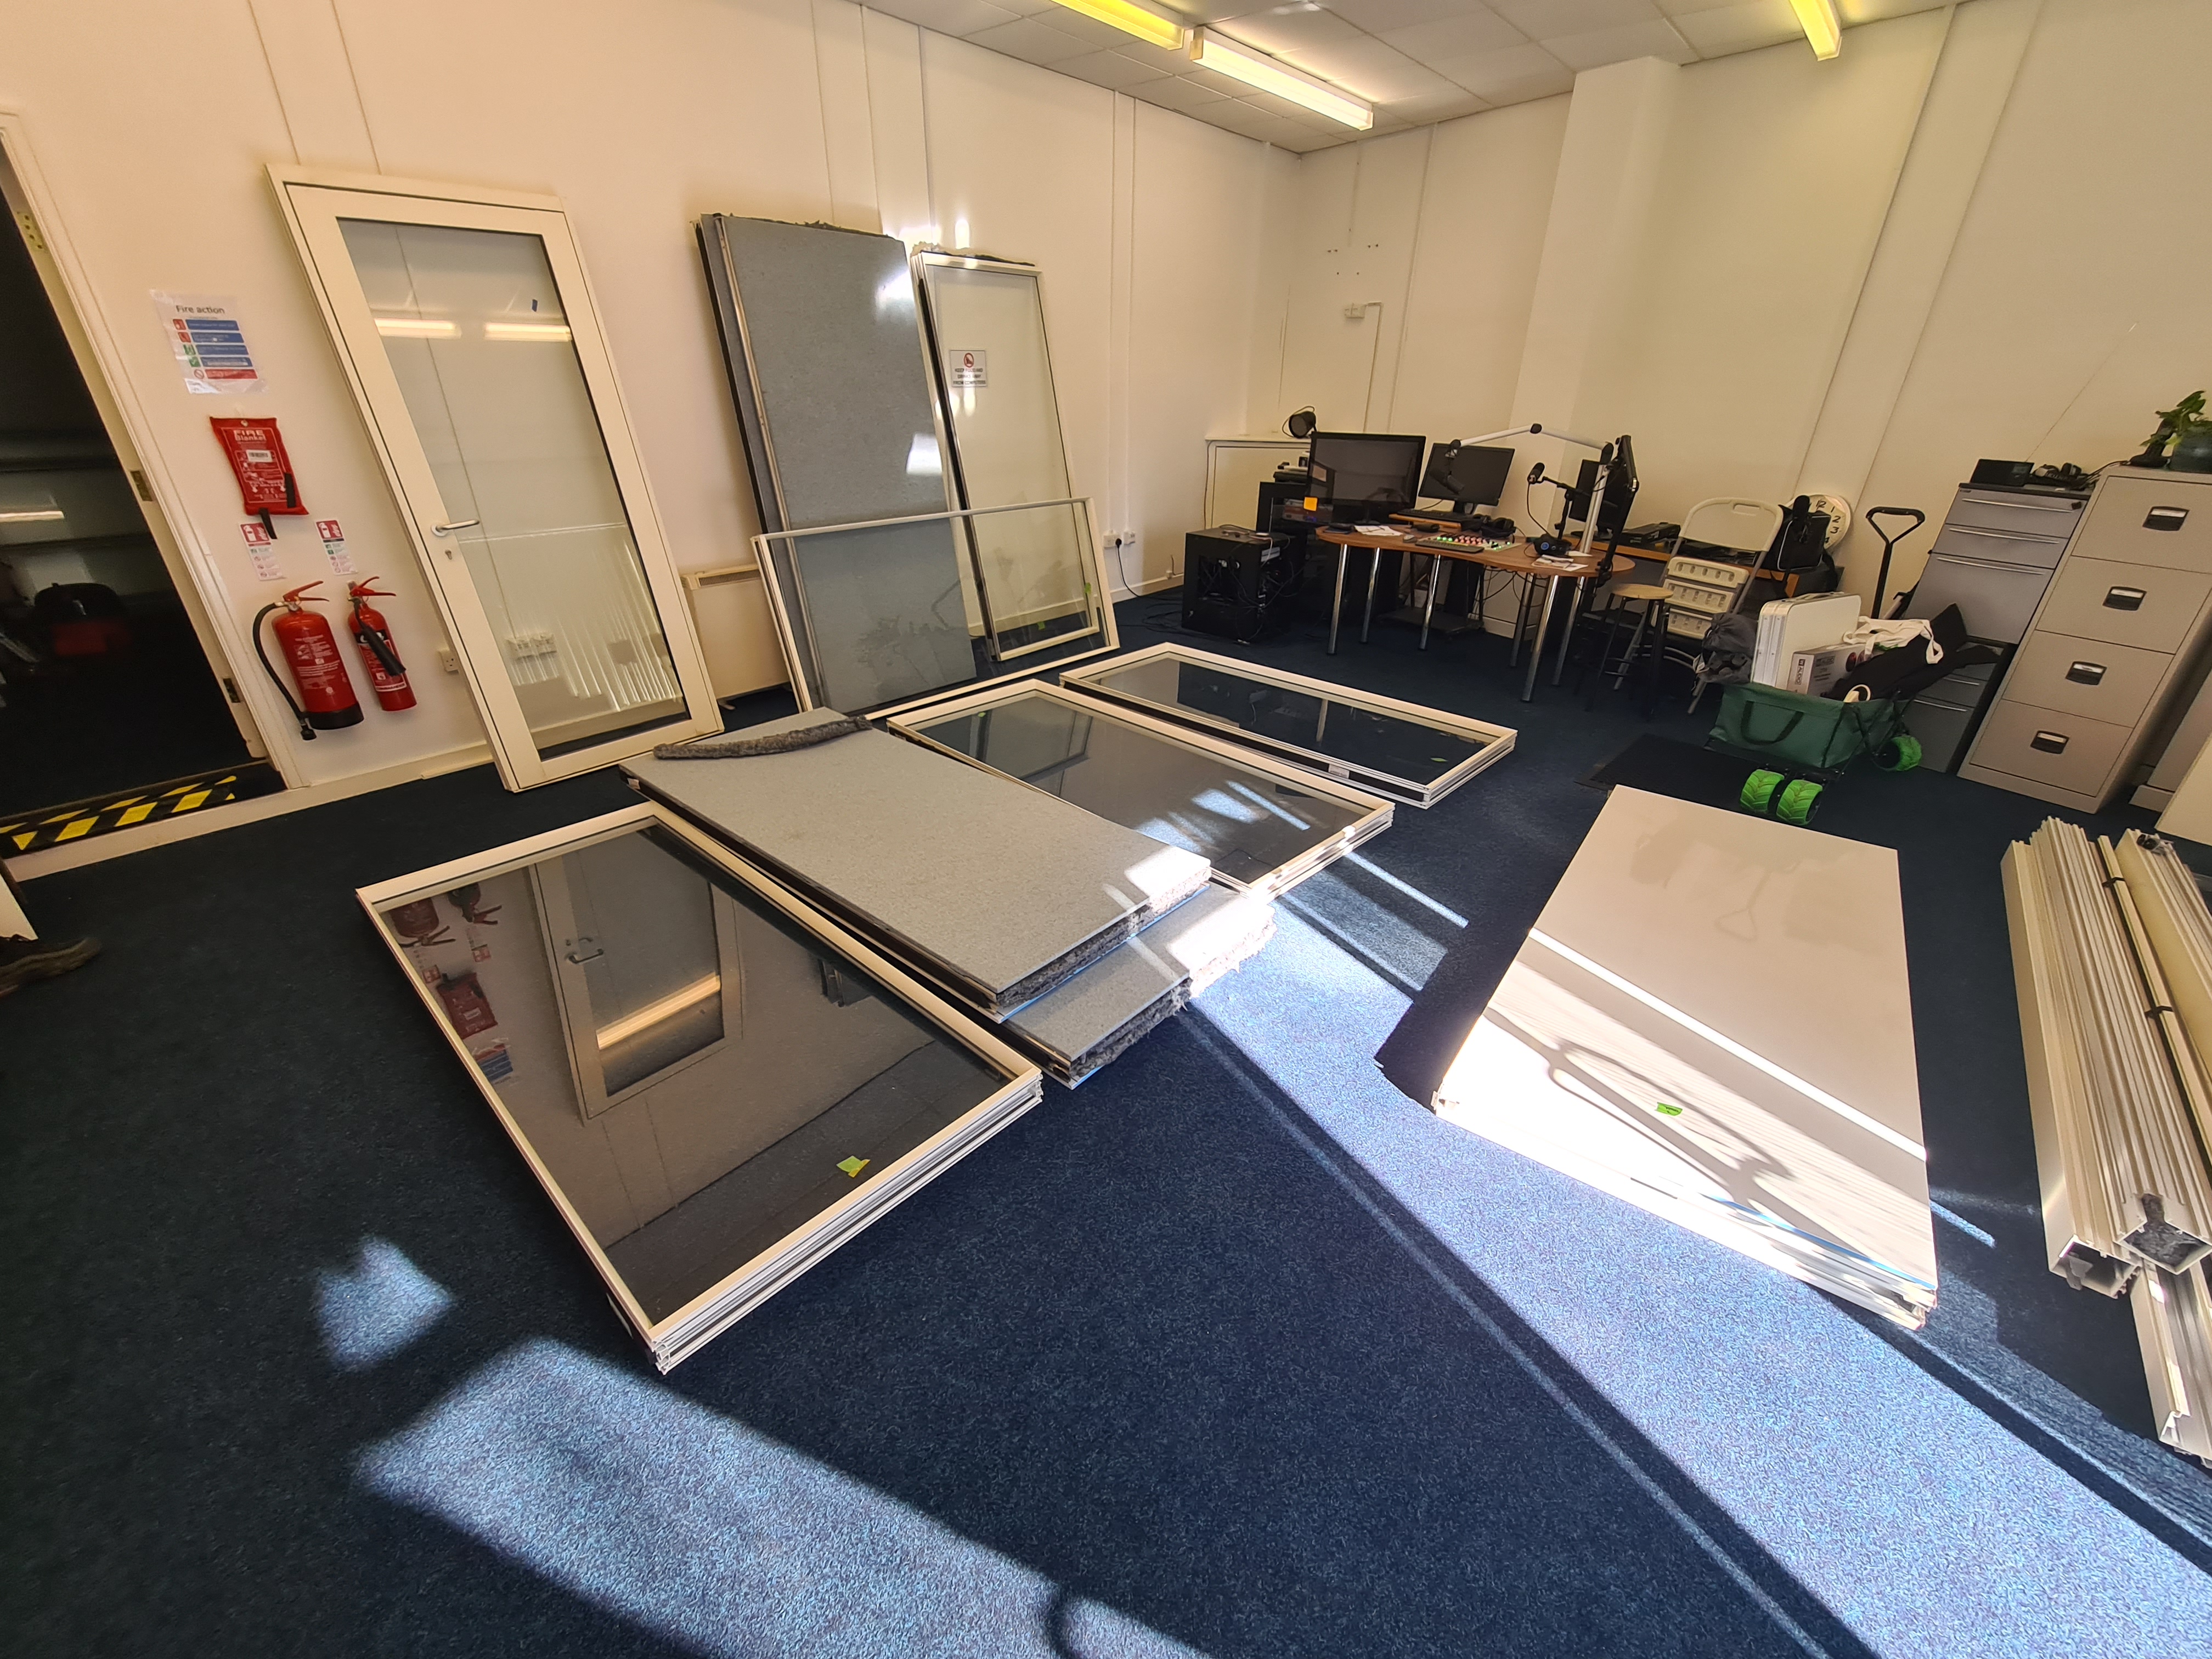 Glass panes and doors laid out in a room, ready for installation of a soundproofed booth